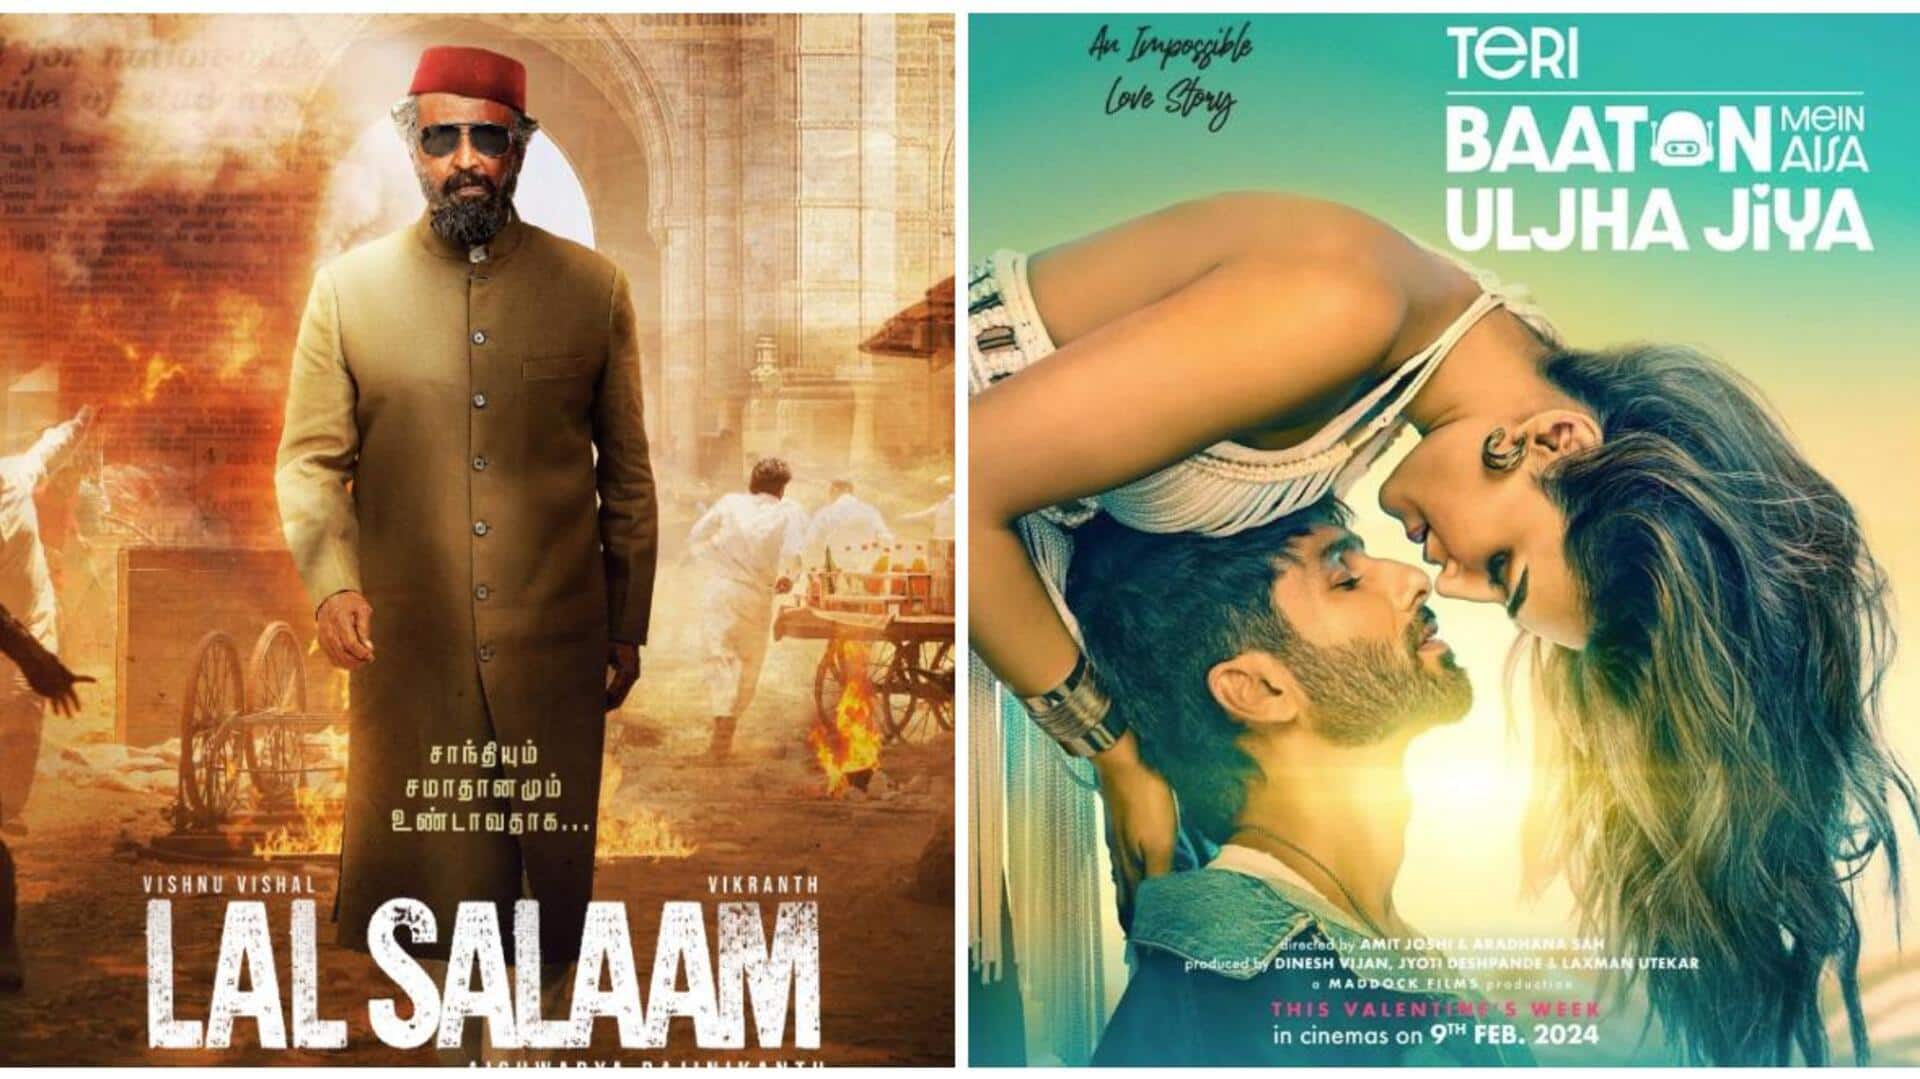 5 new movies releasing in cinema halls near you